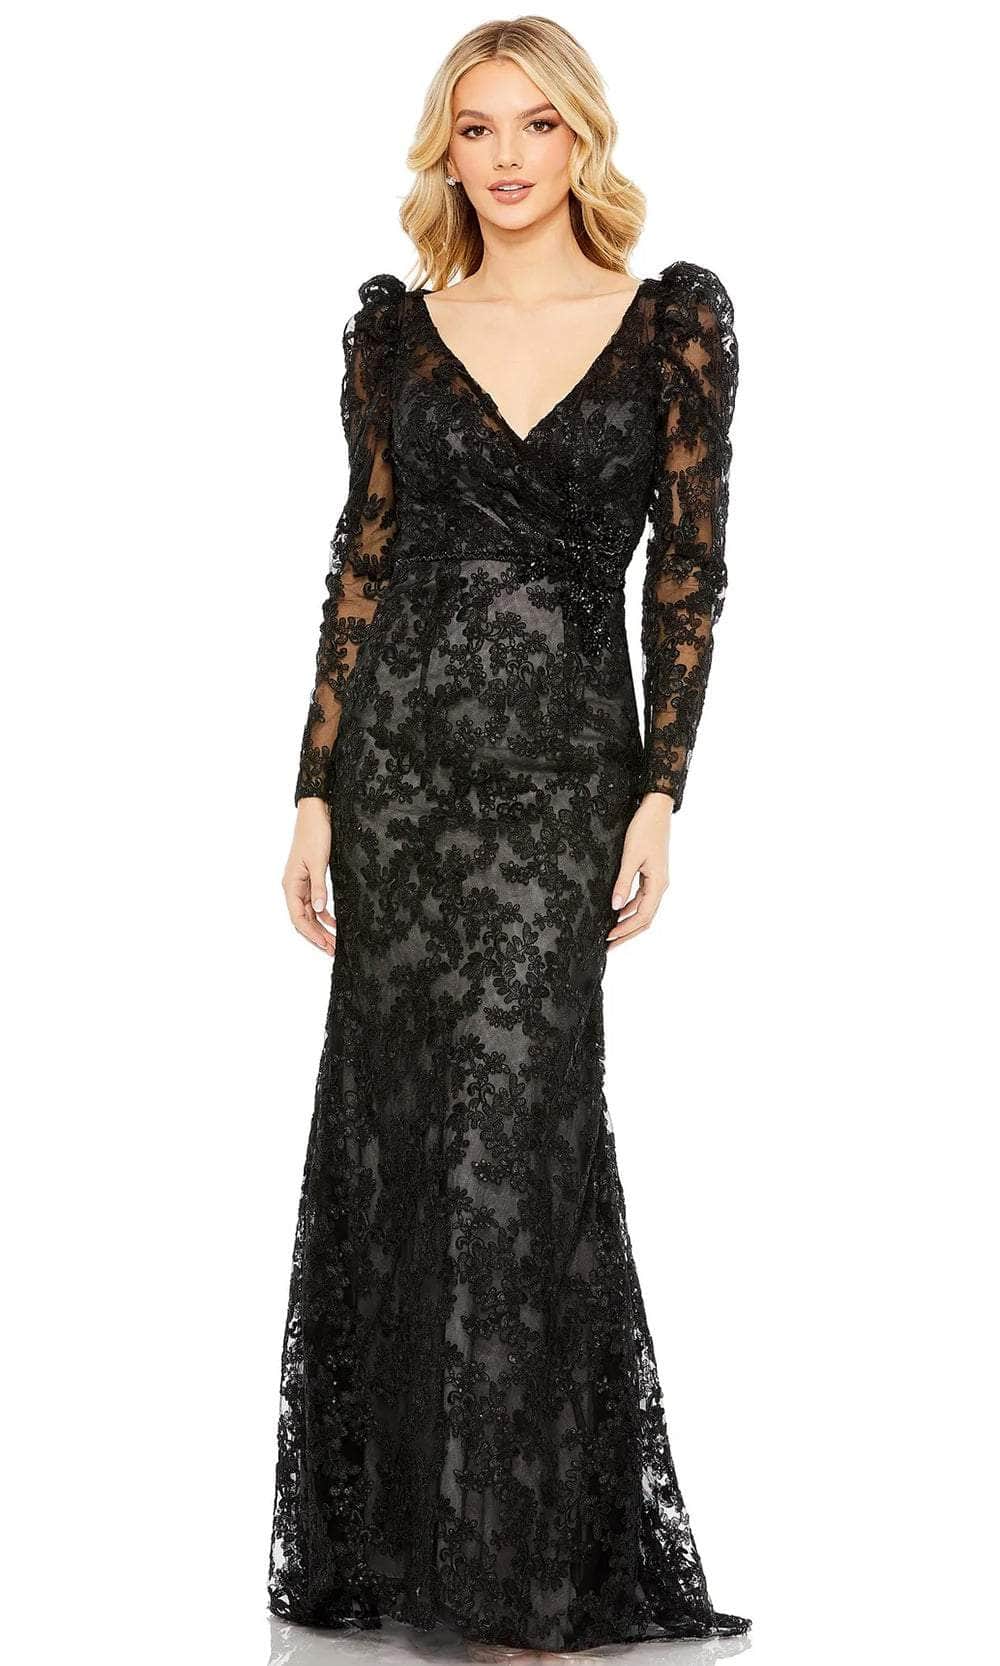 Image of Mac Duggal 11324 - Embroidered Lace Evening Dress